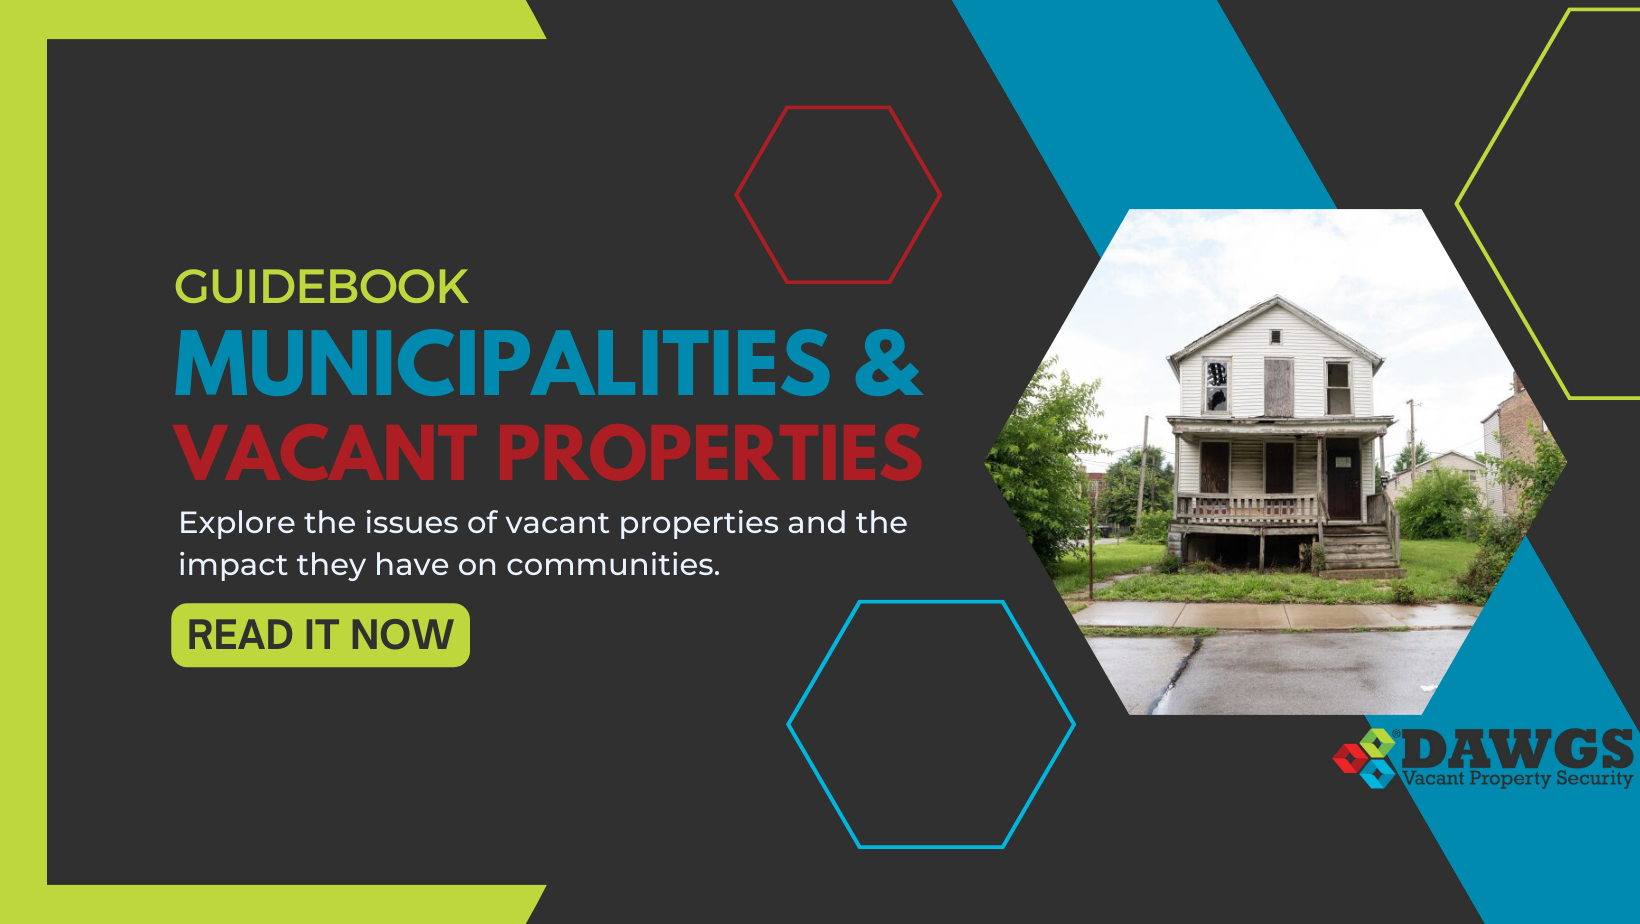 Protecting vacant properties through renovation and investment - a guidebook for municipalities coping with vacant property issues - DAWGS Vacant Property Security